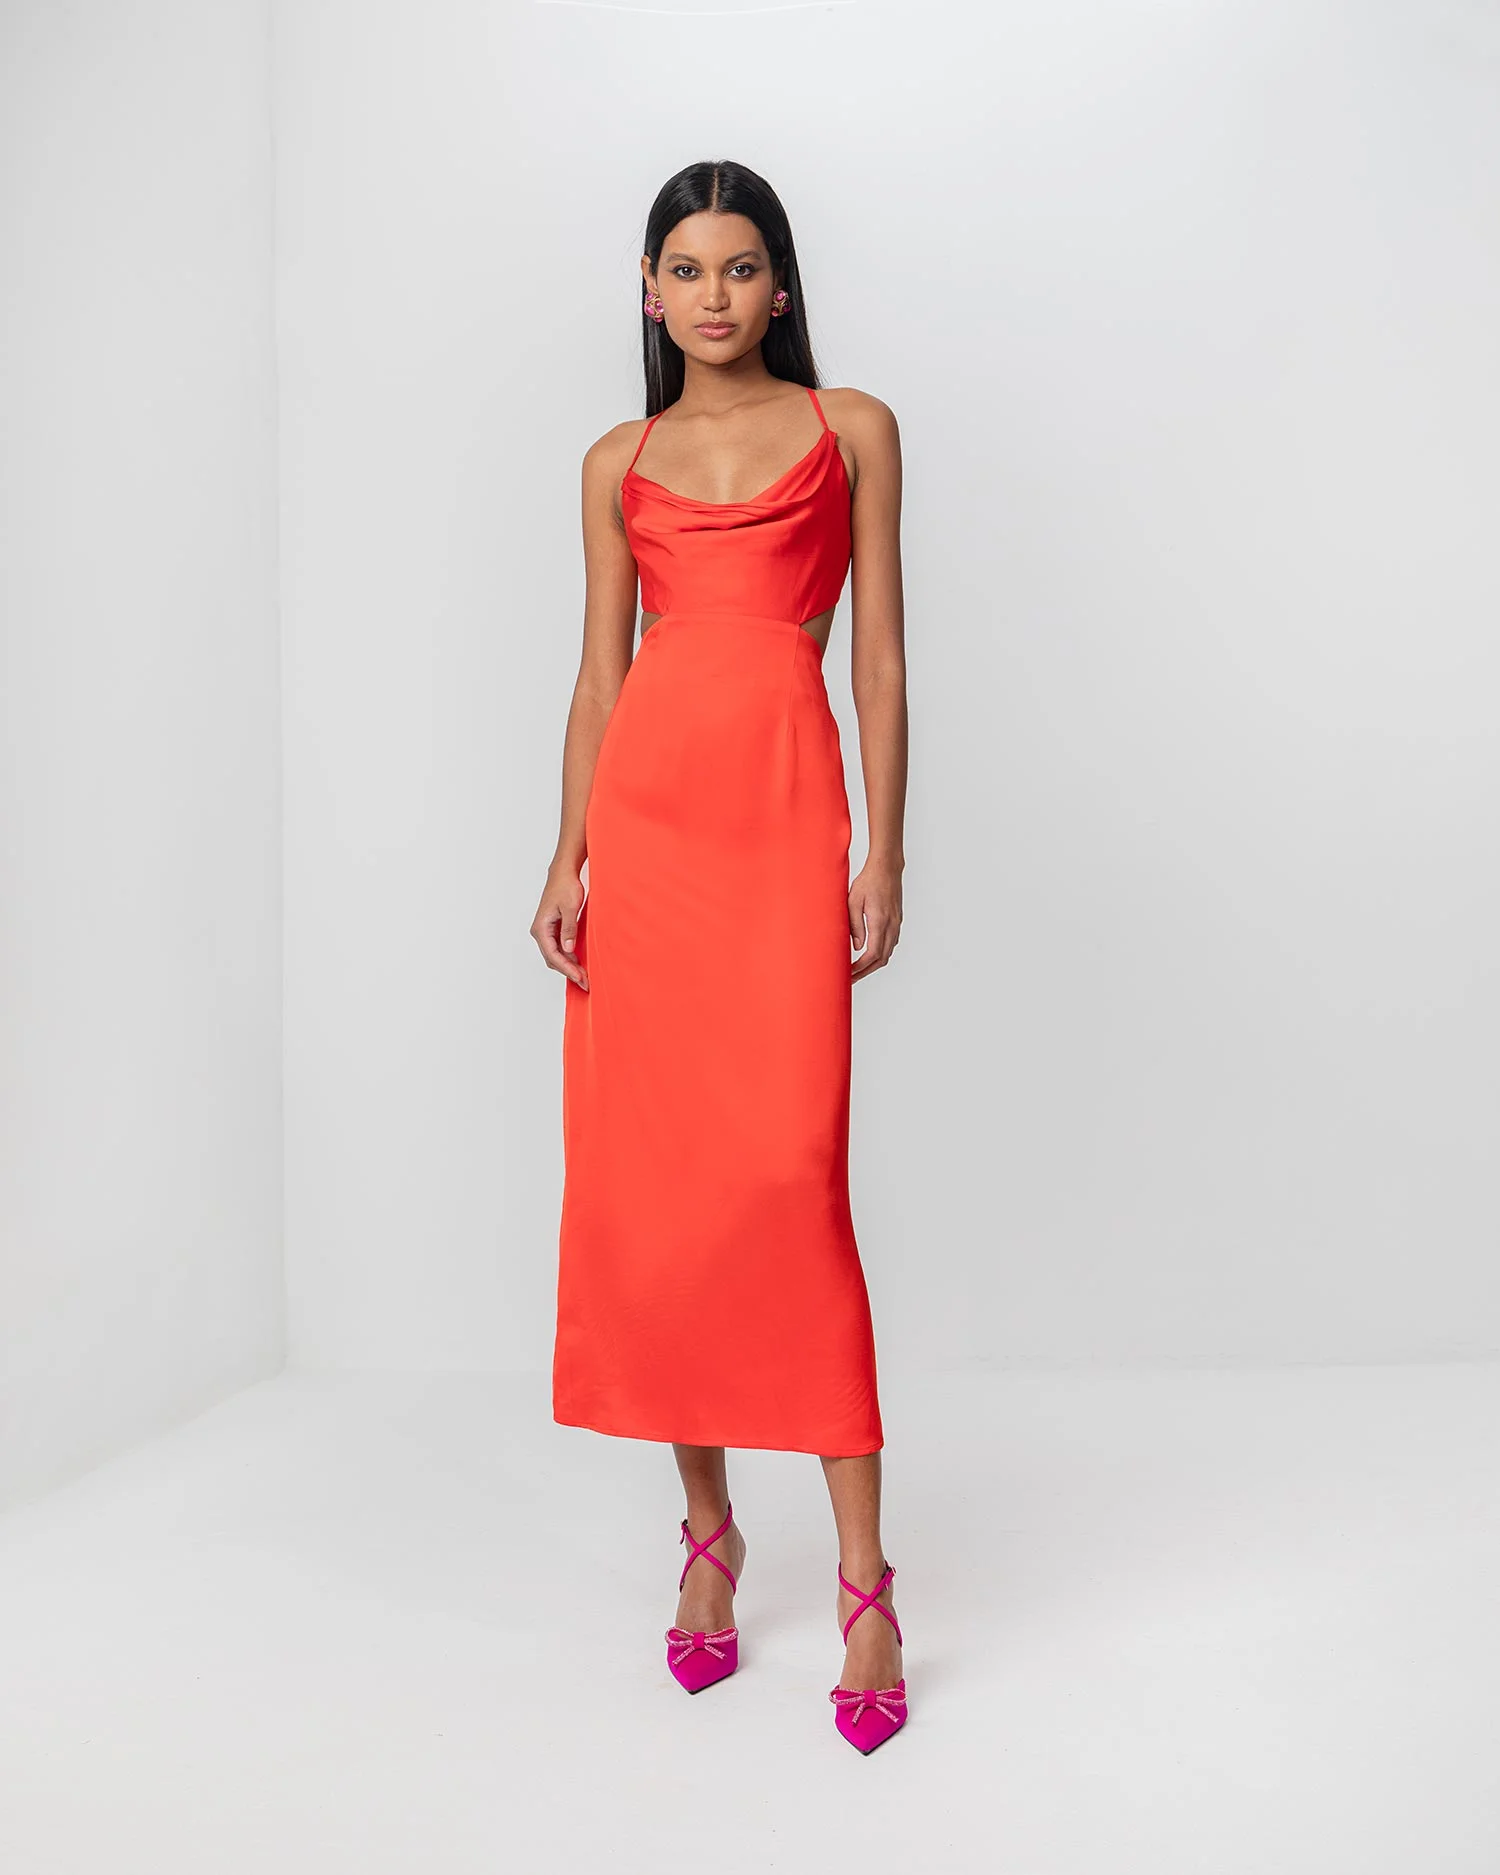 Ianthe dress - FOREVERYOUNG THE LABEL